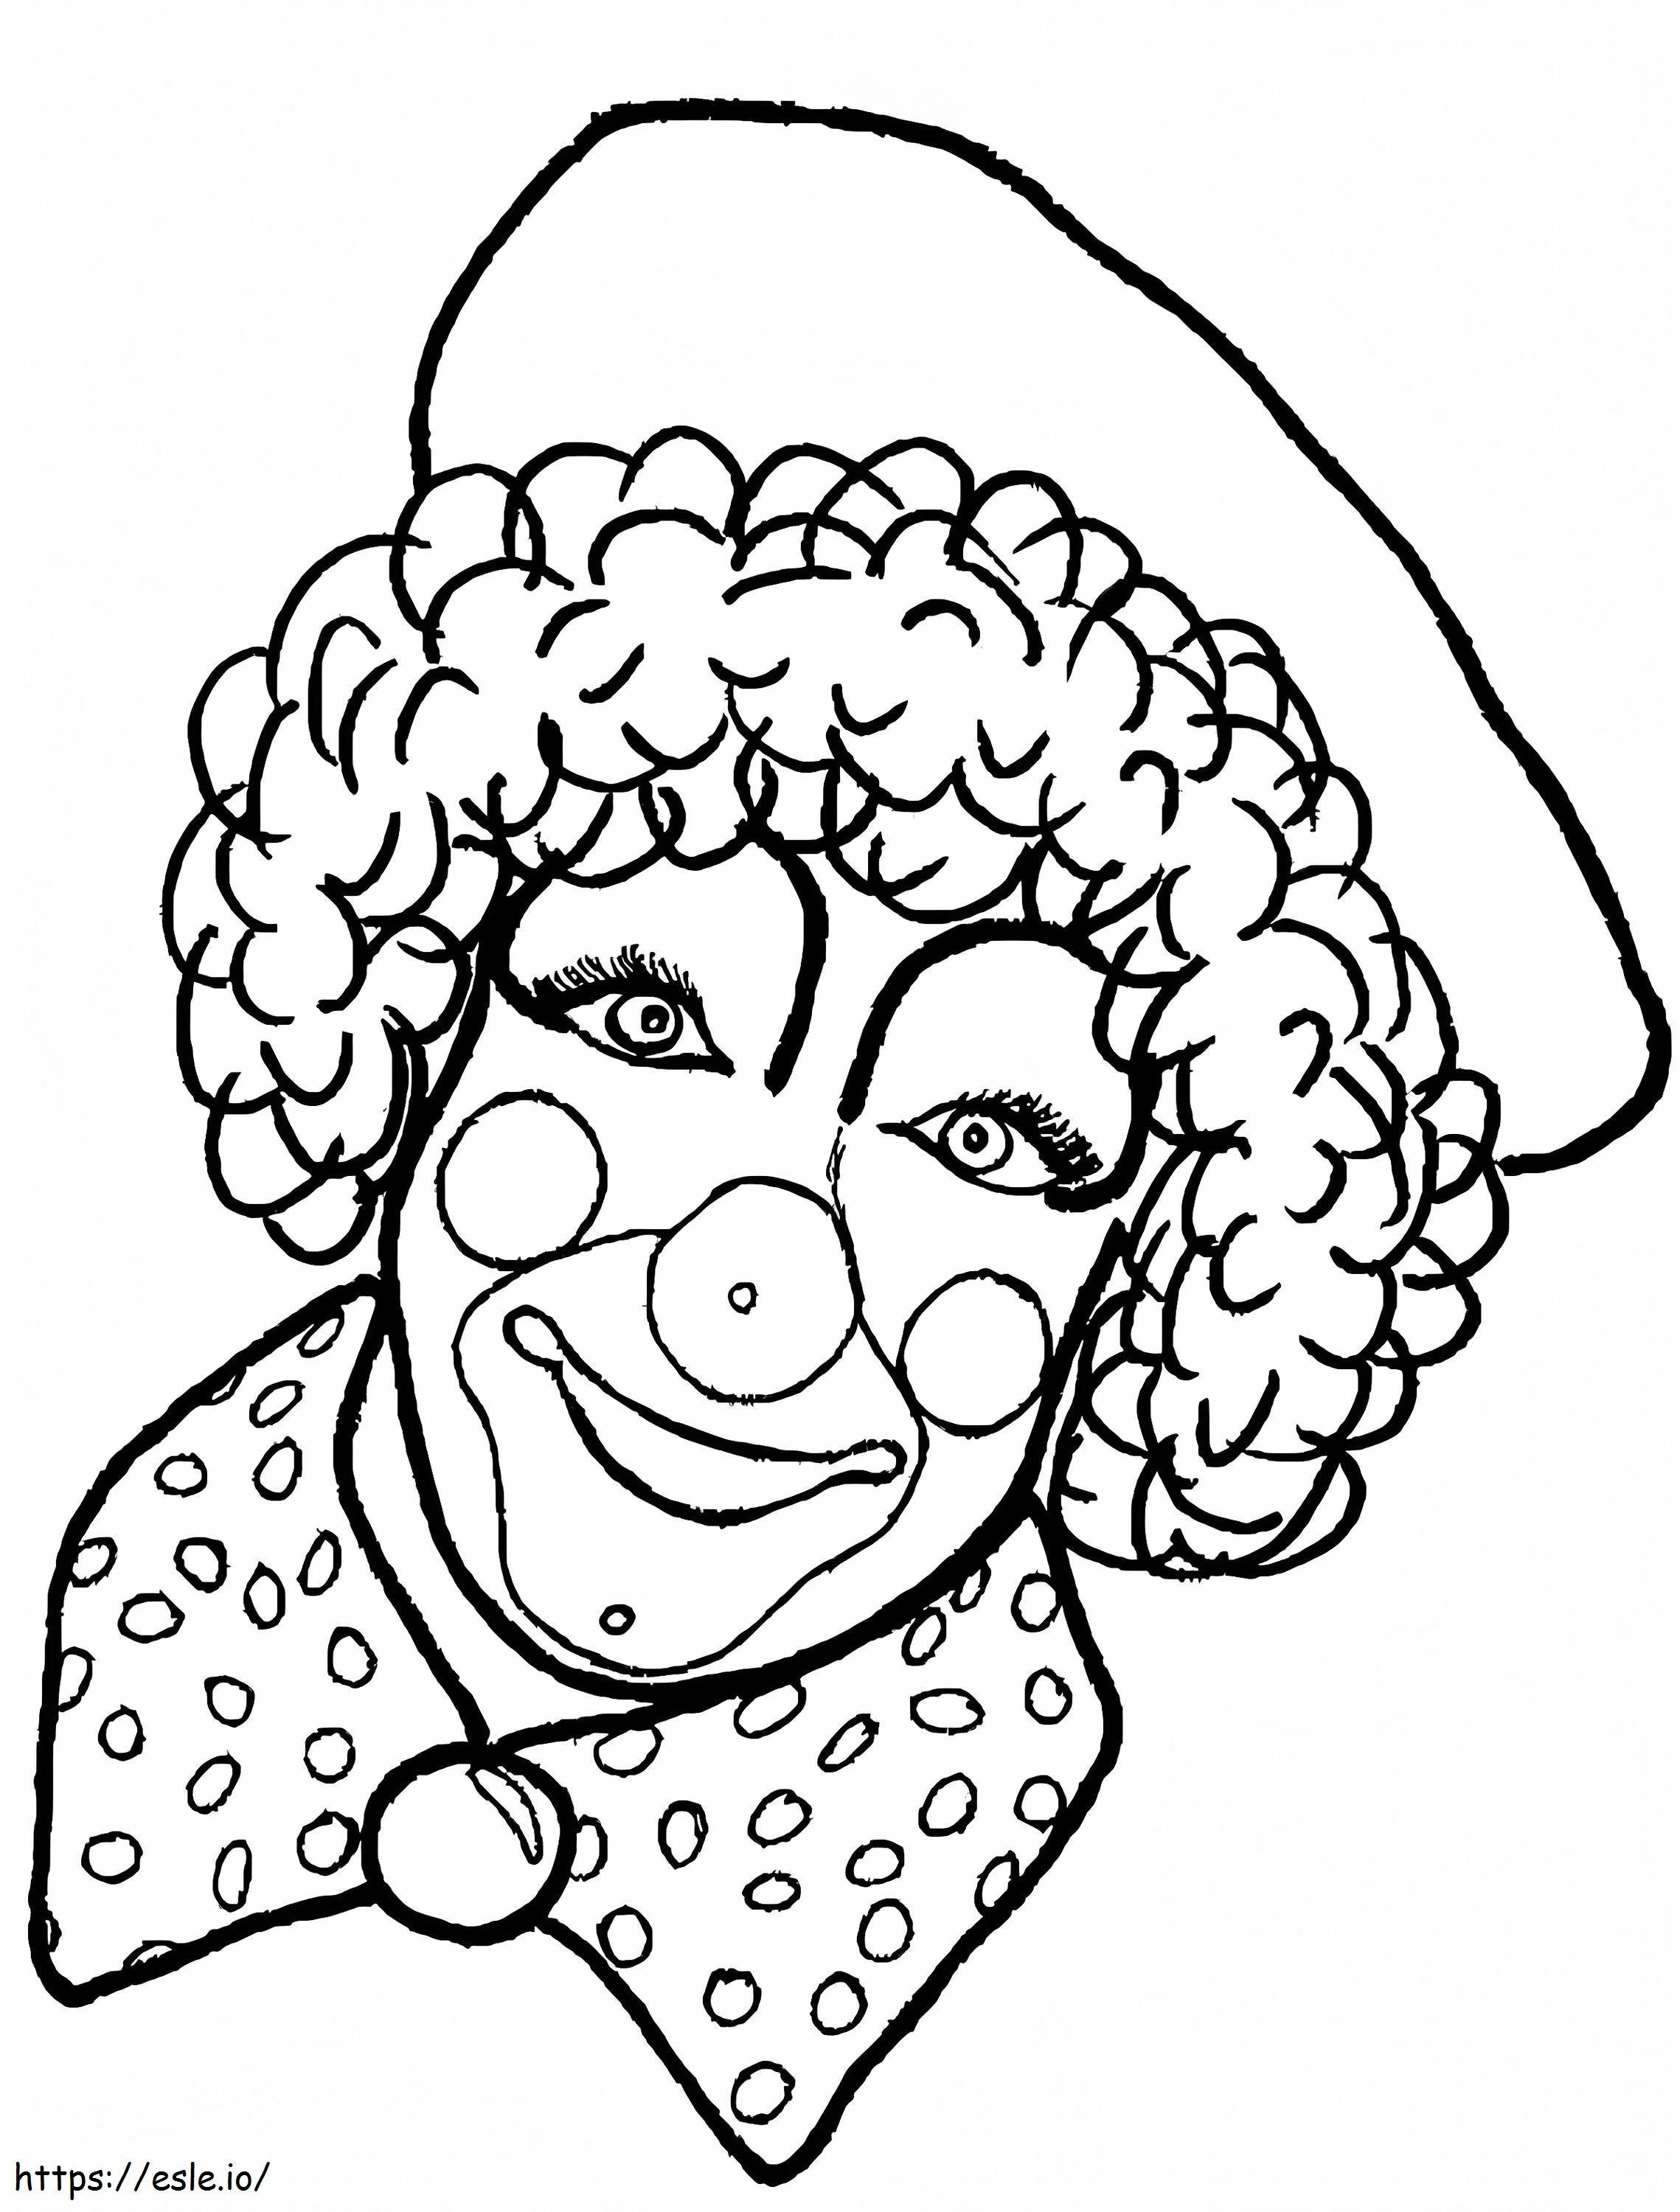 Carnival 13 coloring page